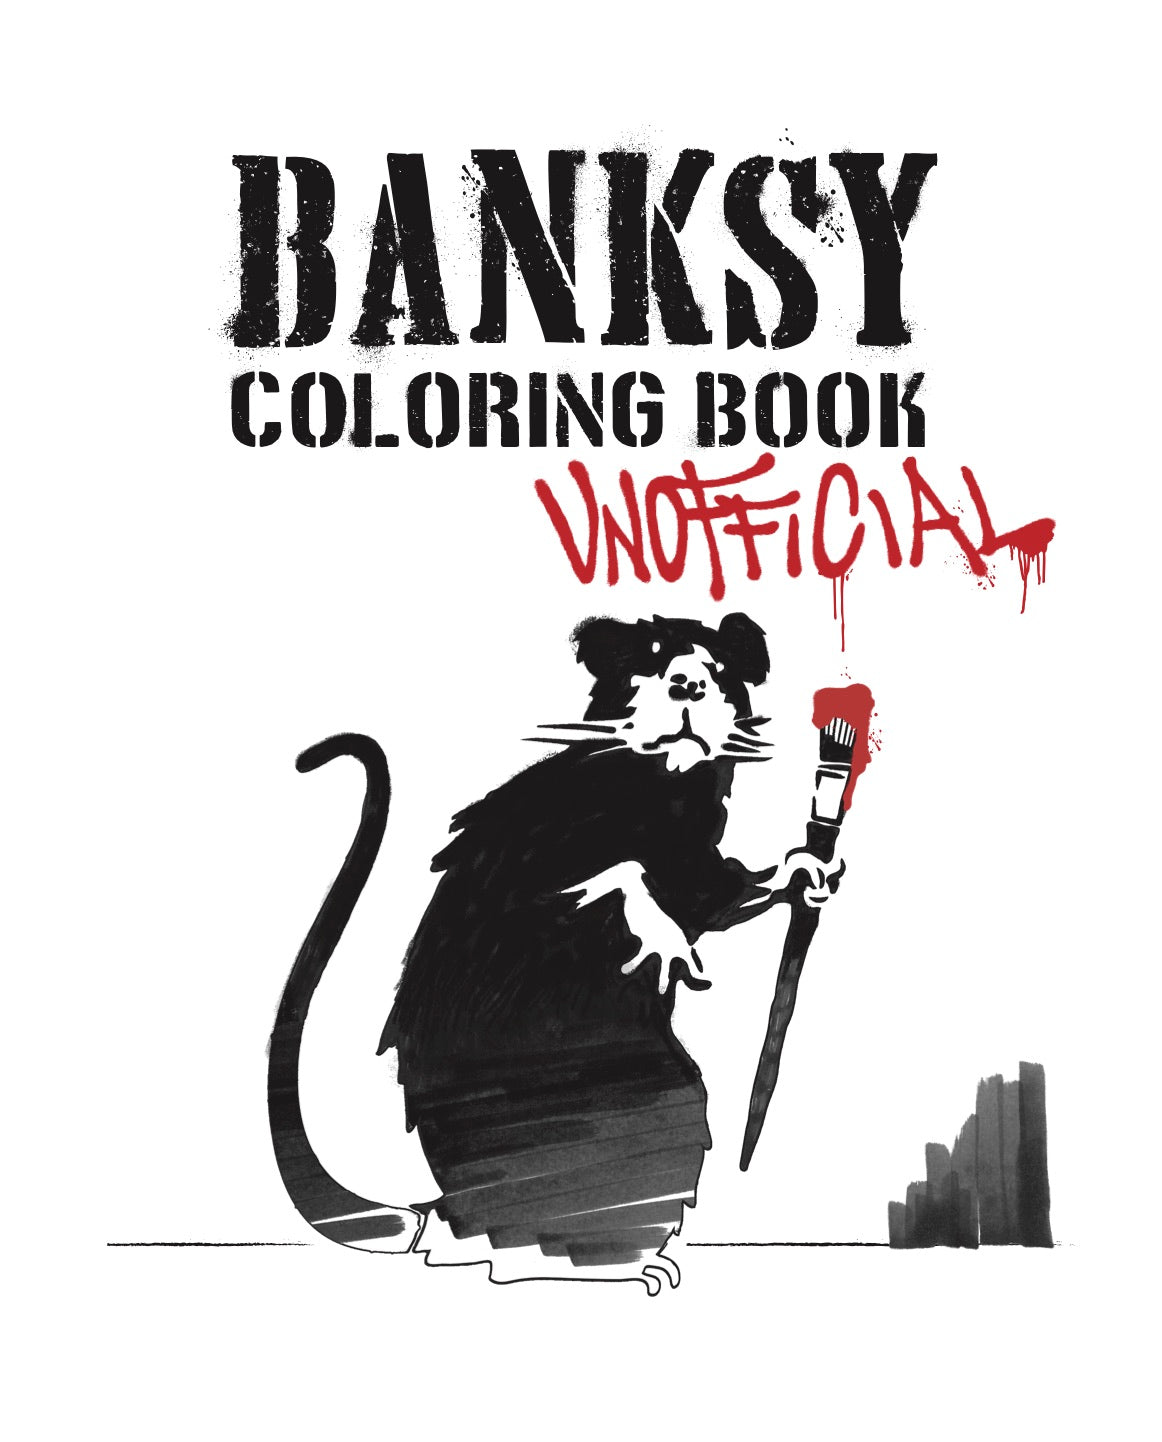 Banksy Coloring Book - Unofficial cover